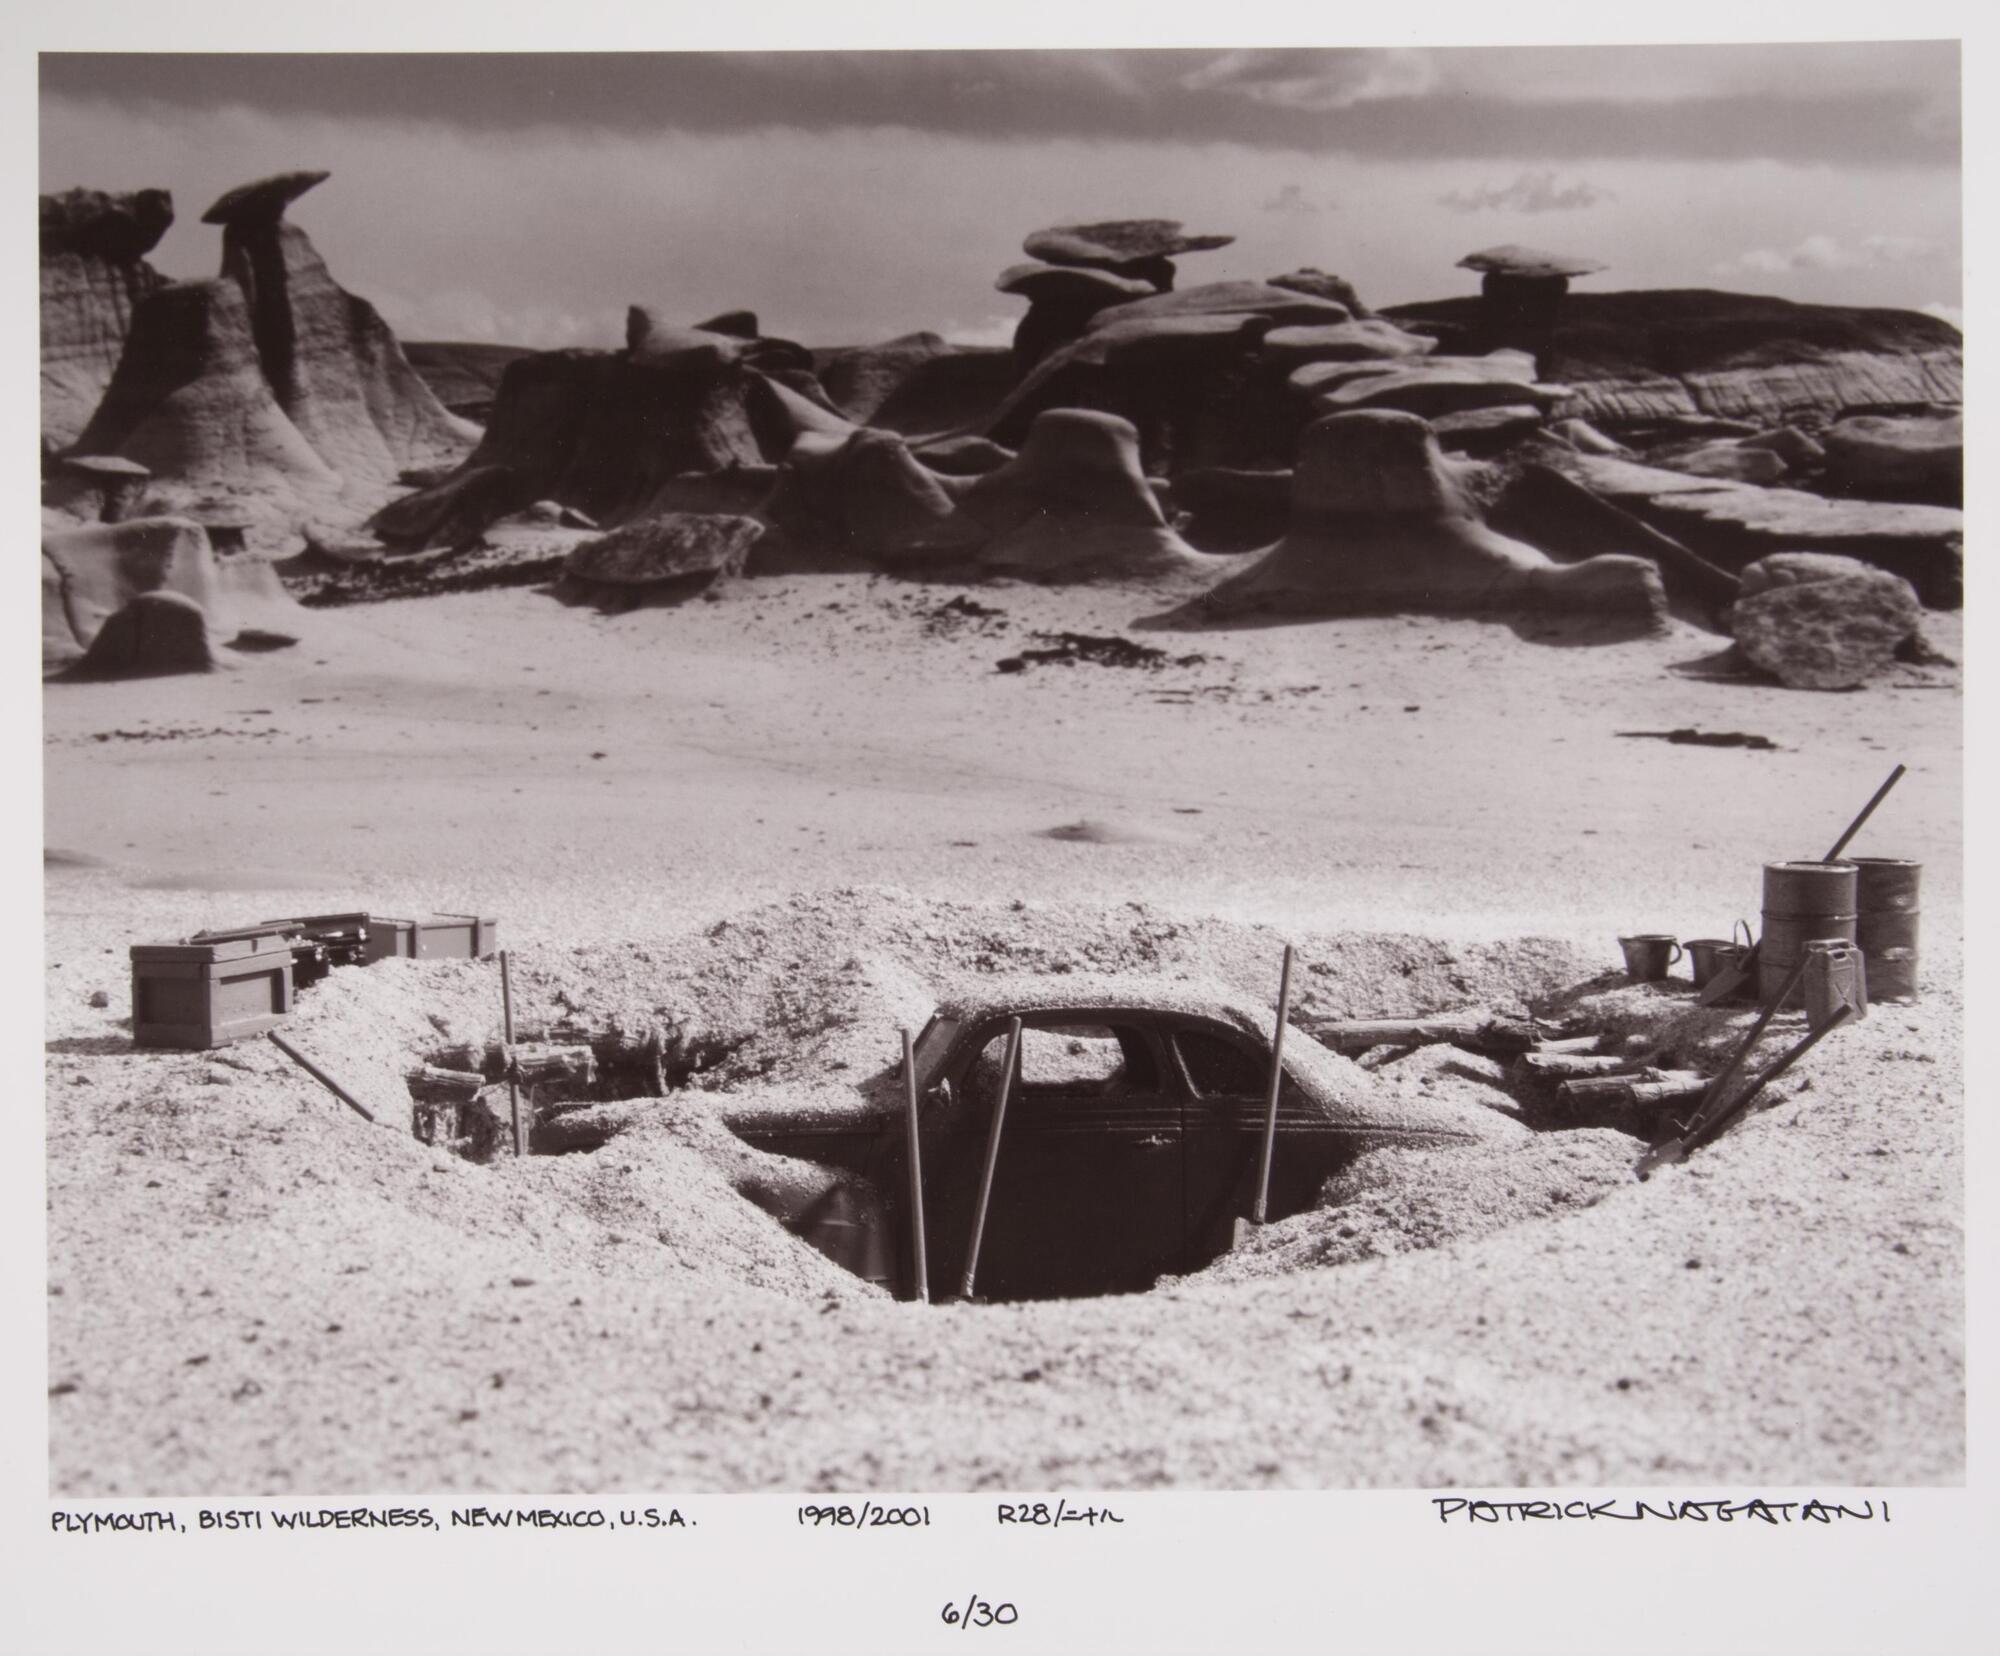 This photograph depicts a view of a sandy desert with eroded rock formations in the background. In the foreground is an archaeological excavation of a buried car.